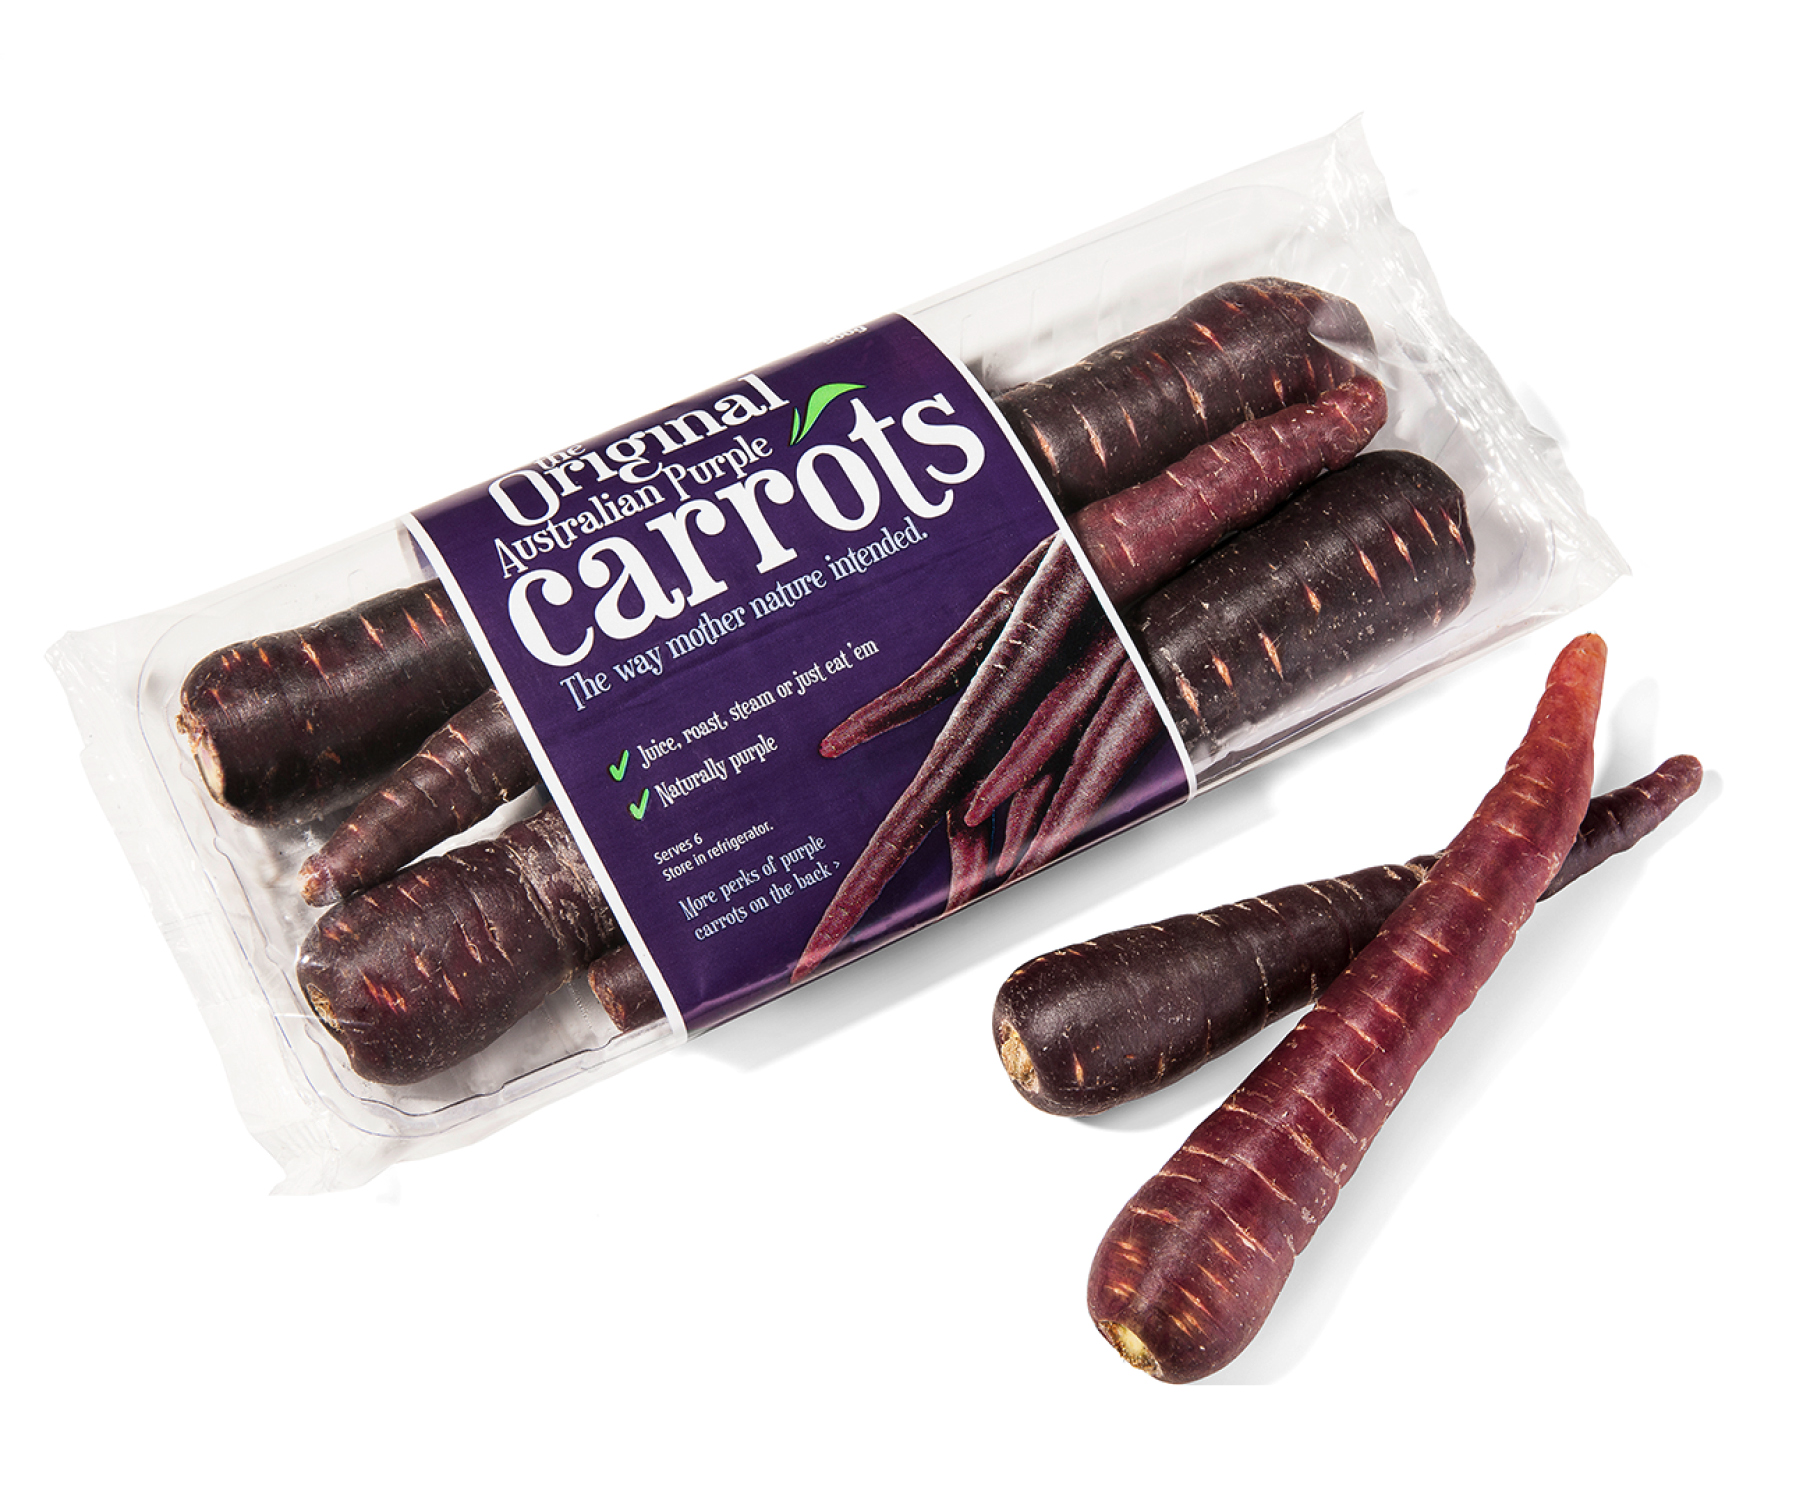 Three Brothers - Packaging carrots with character. Tasmania's largest carrot grower, Three Brothers, is situated in the pristine Forth Valley where the rich volcanic soil and cool, crisp air produce perfect growing conditions.  The proud owners Mike, Rick and Jim Ertler wanted packaging that highlighted the quirky nature of their Original Tasmanian Purple and Chantenay Carrots. Our brand strategy highlights the nutritional perks of eating purple carrots and their more common, but equally fresh orange cousins. Our packaging solutions and website weaves a story around their product range which also includes Brussels sprouts.